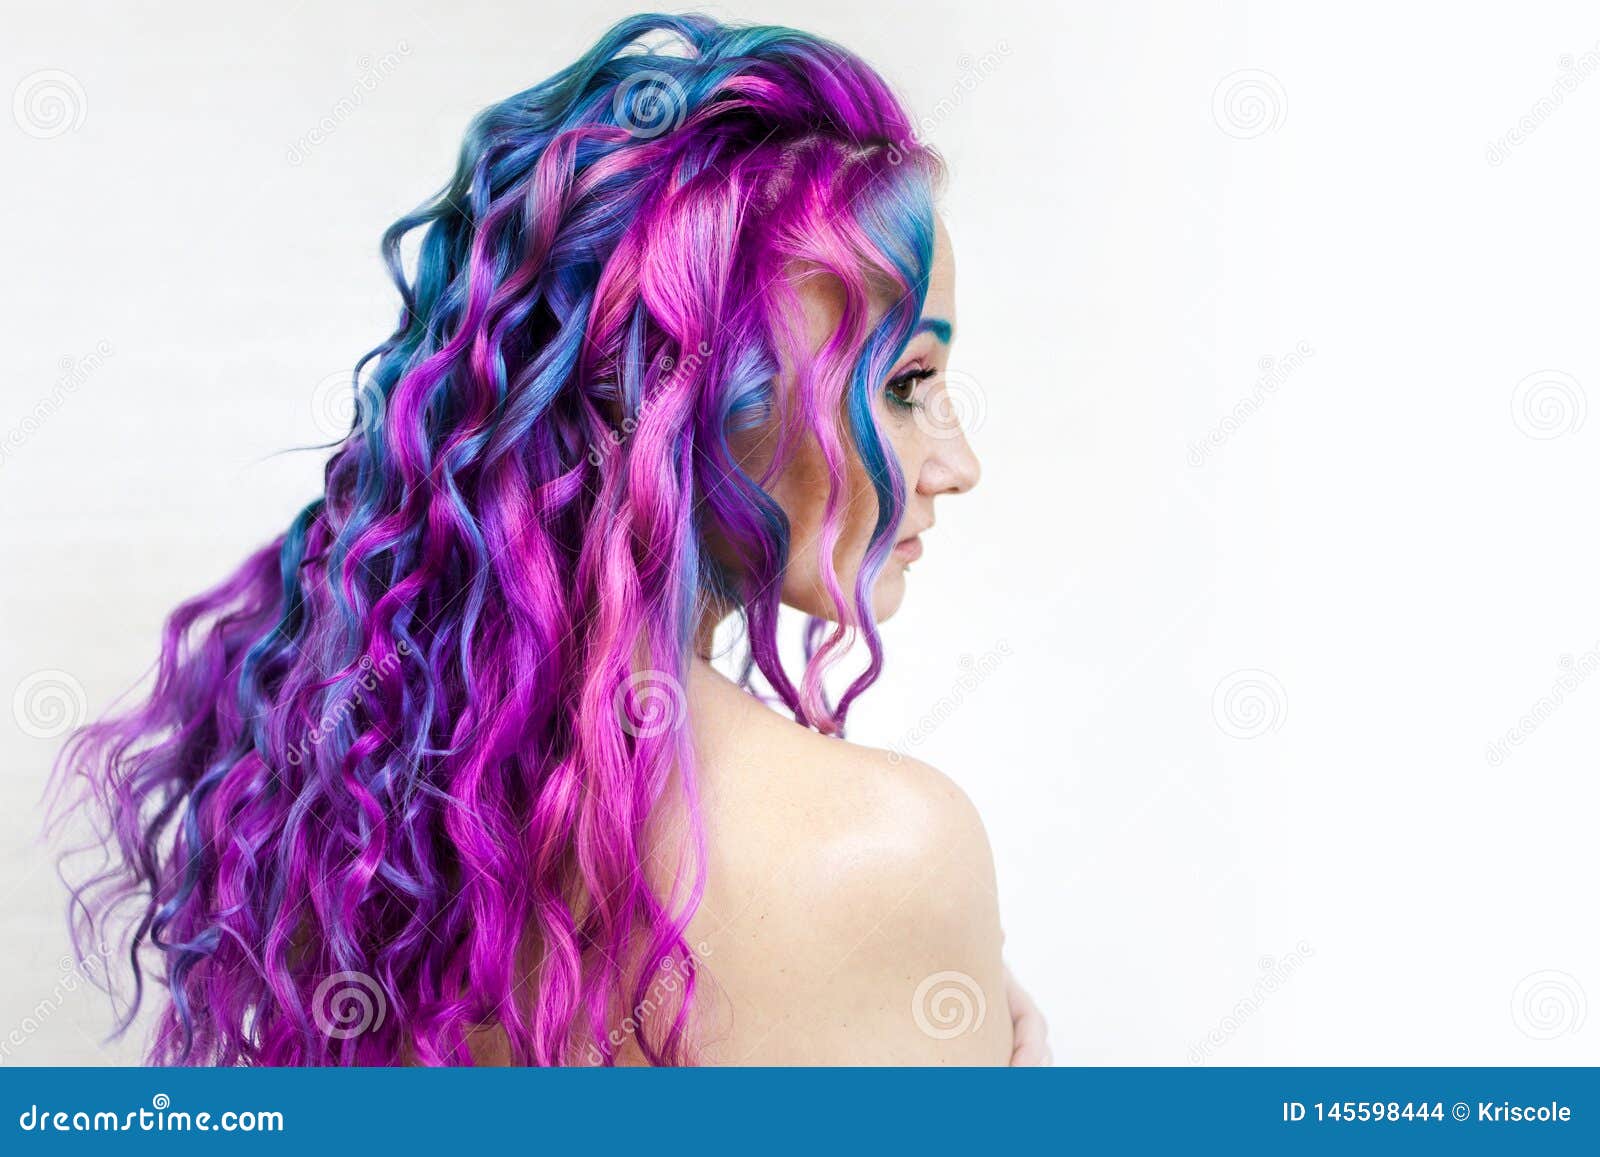 Blue on Pink Hair: 10 Bold and Beautiful Looks - wide 5